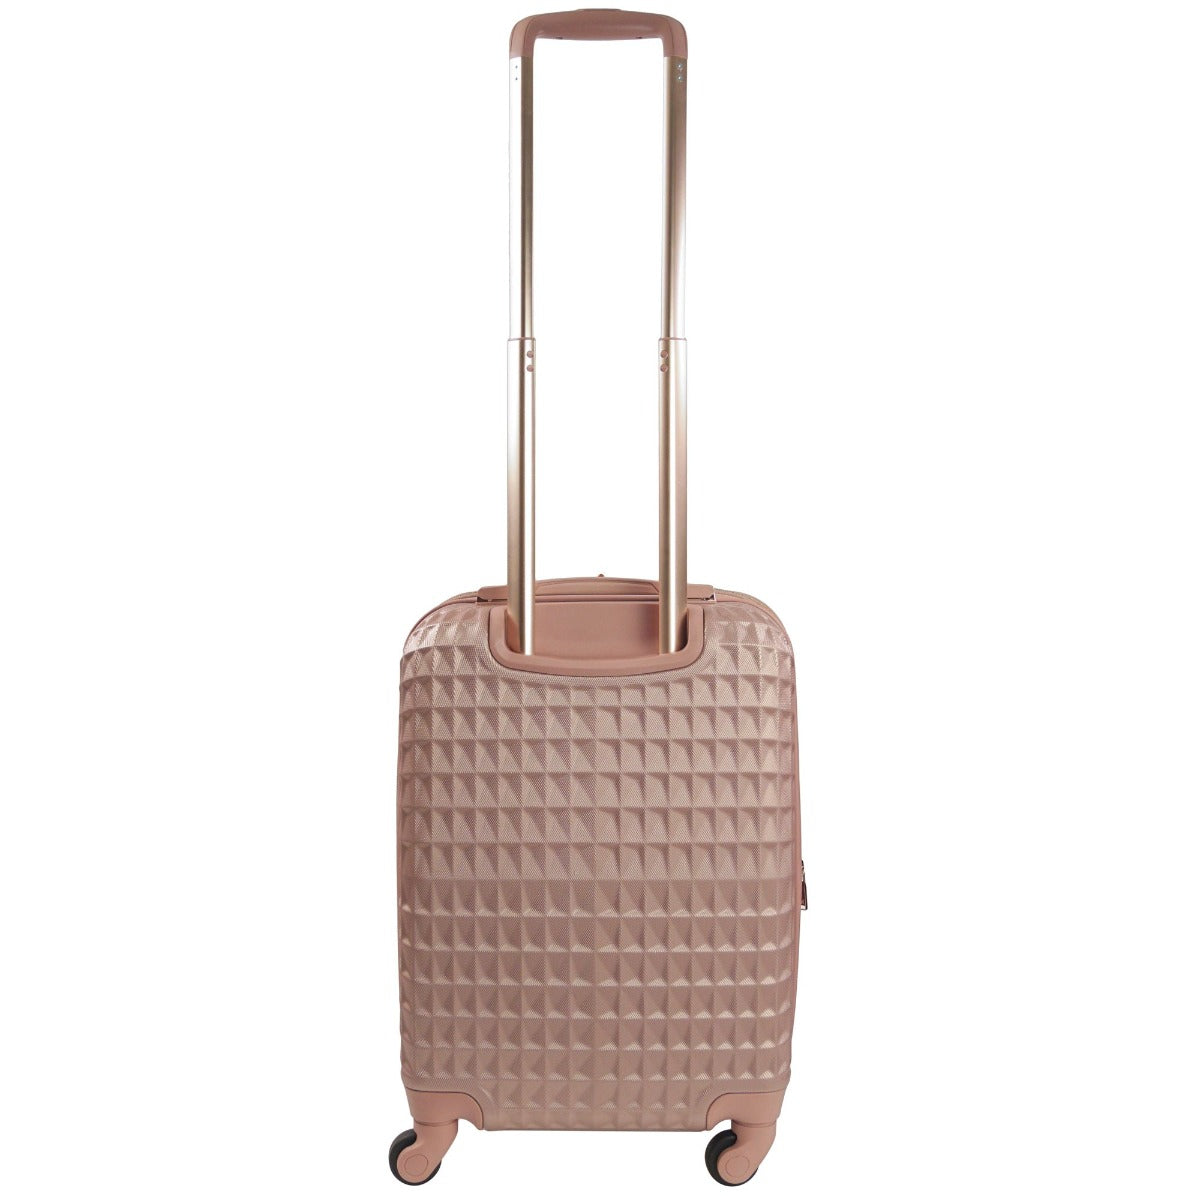 Ful Geo 22" carry on hard sided expandable spinner suitcase rose gold luggage